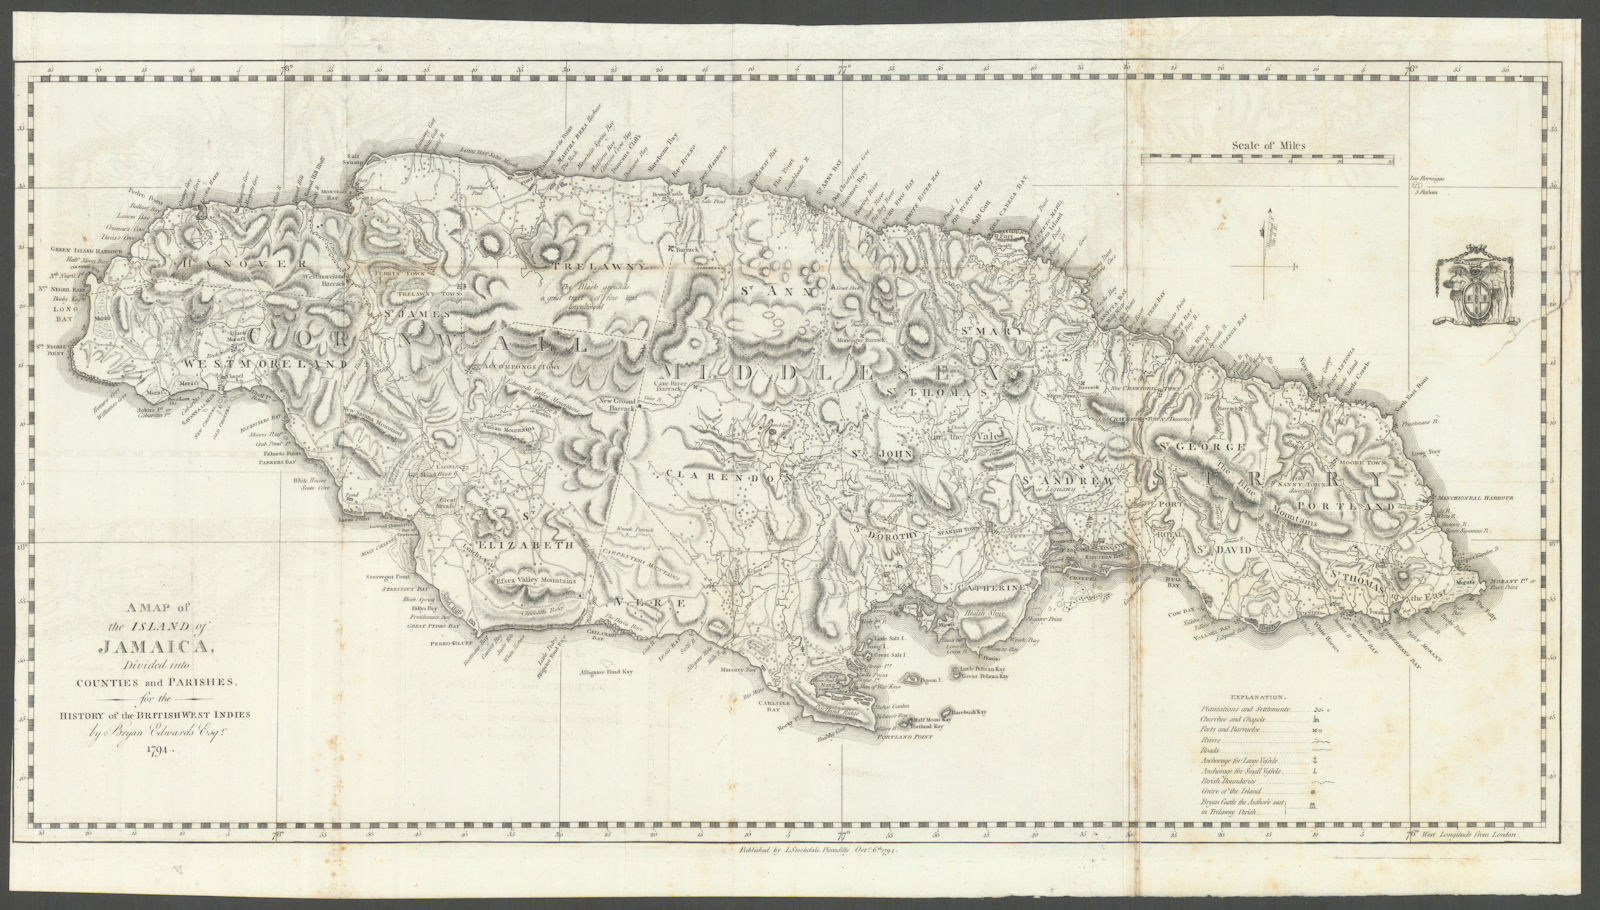 'A Map of the Island of JAMAICA', by Bryan EDWARDS. West Indies. Caribbean 1794